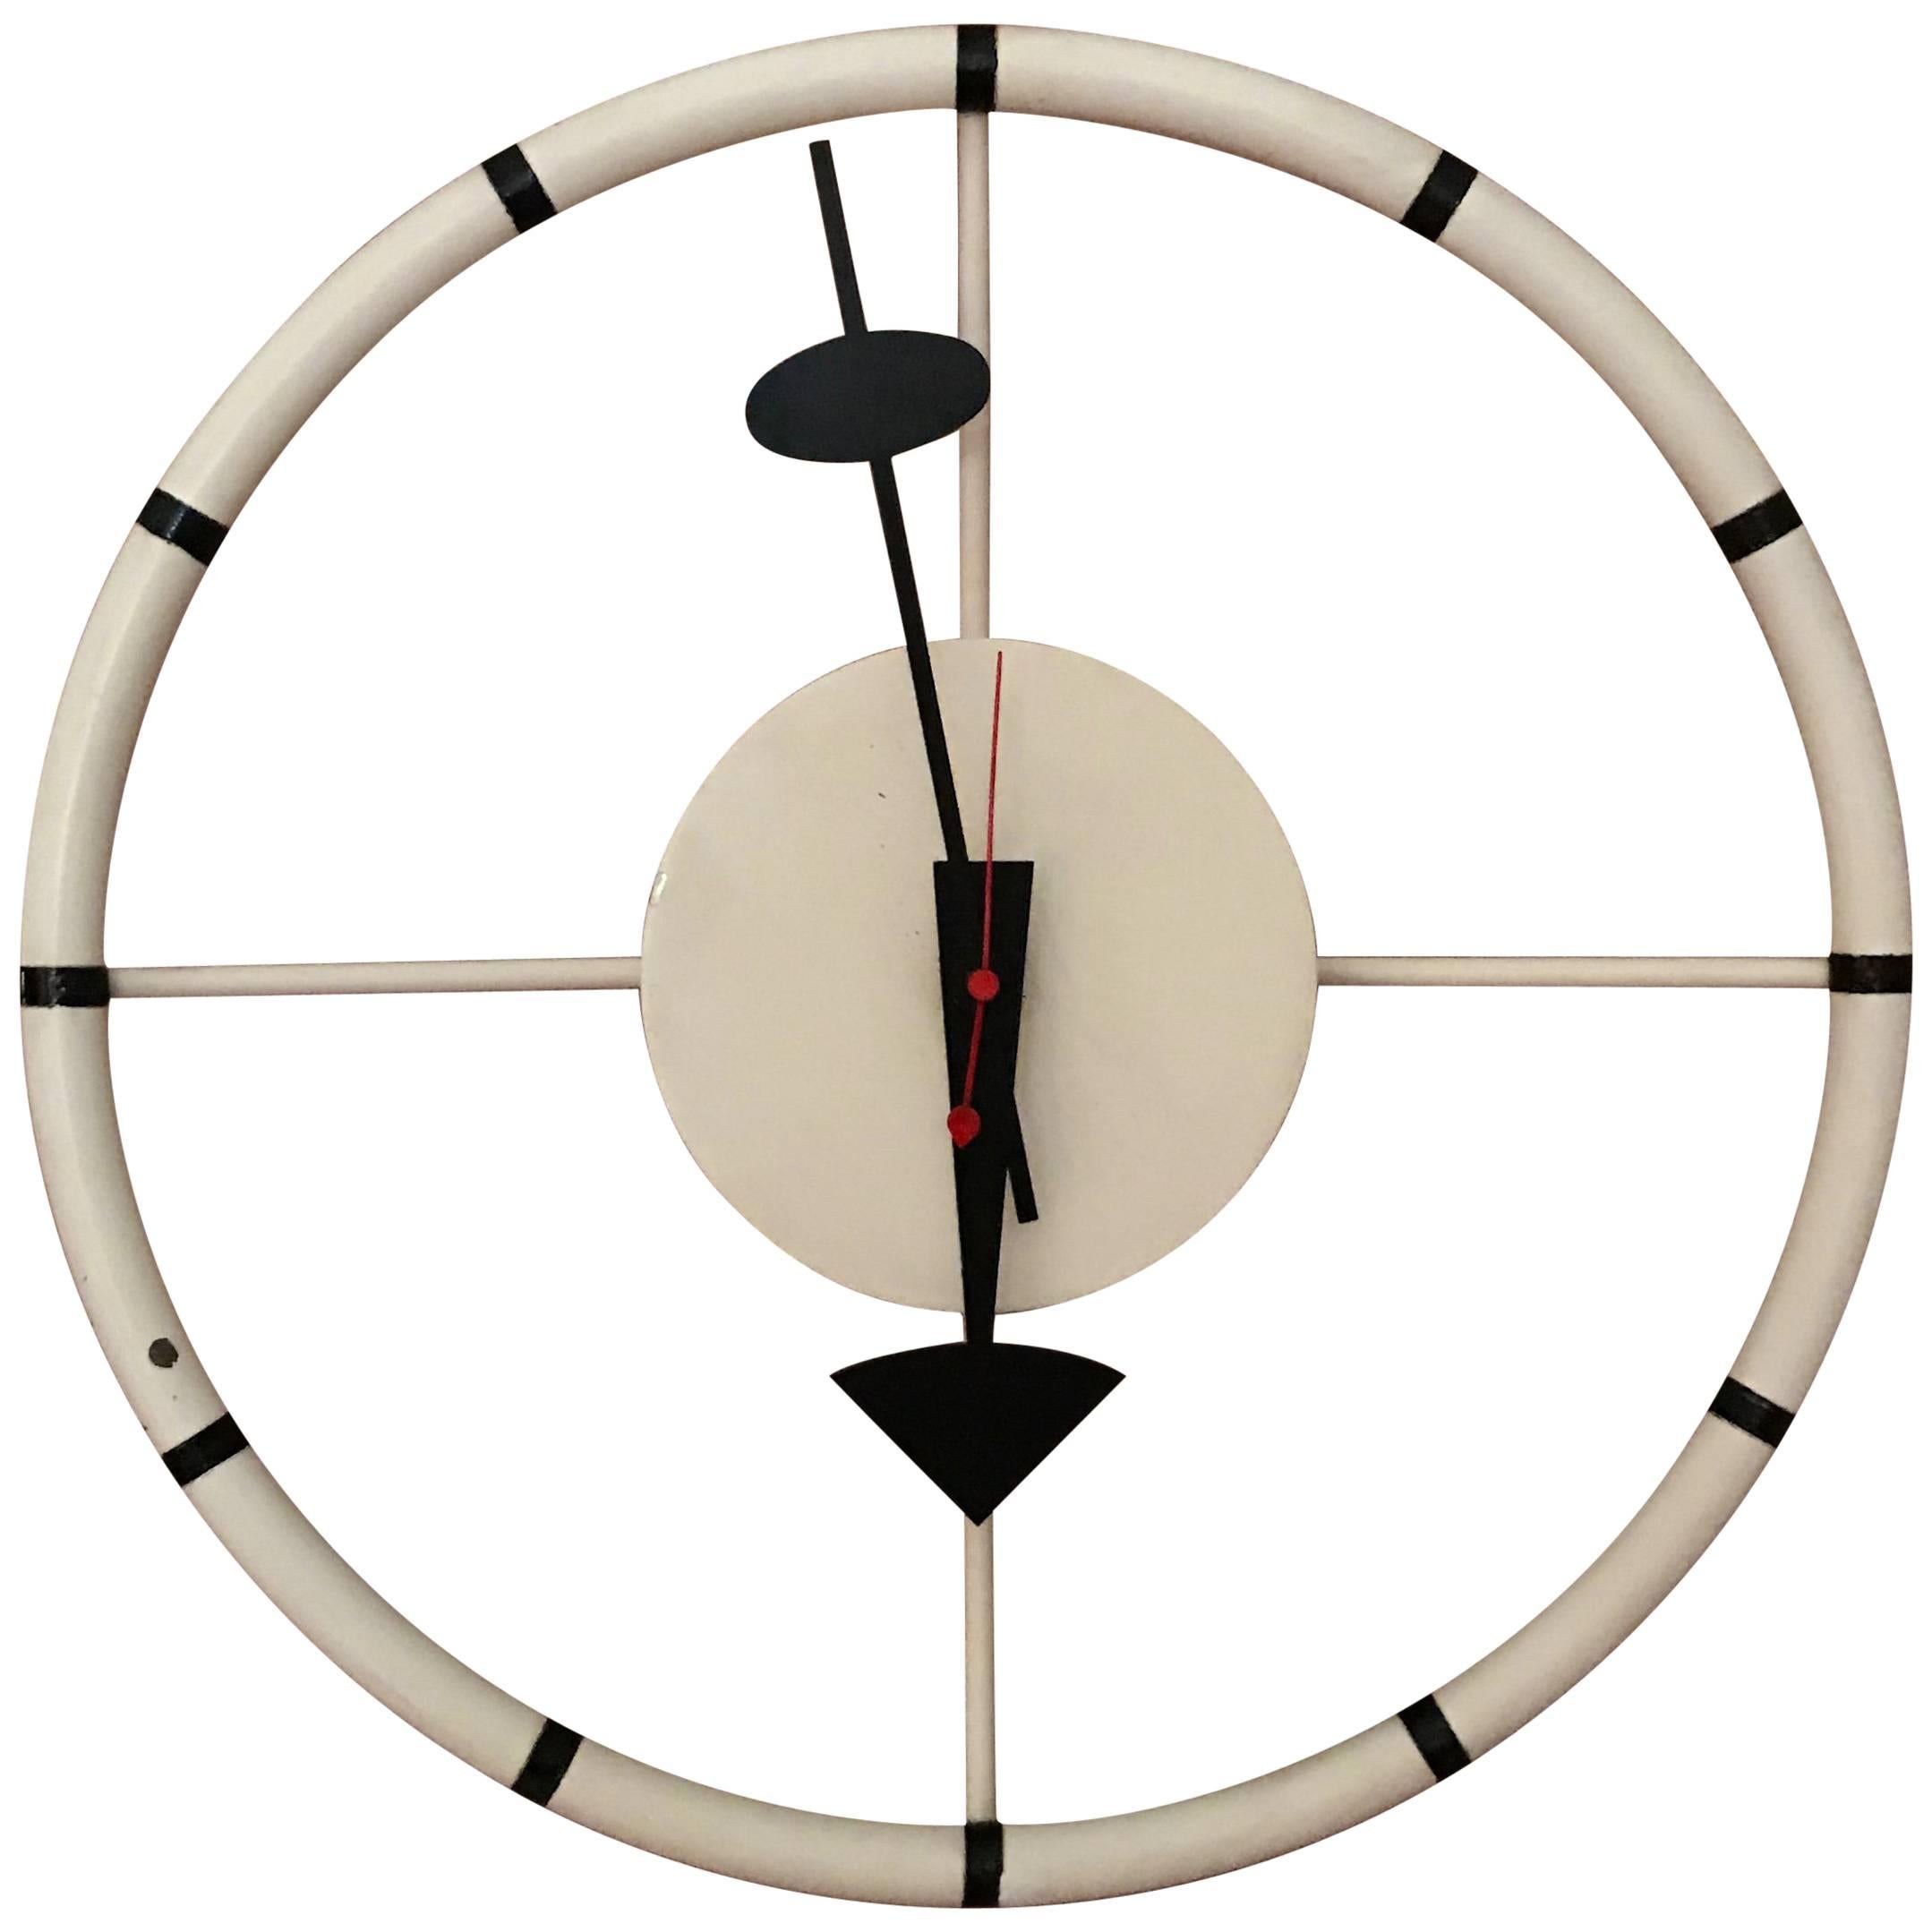 Steering Wheel Wall Clock by George Nelson for Howard Miller